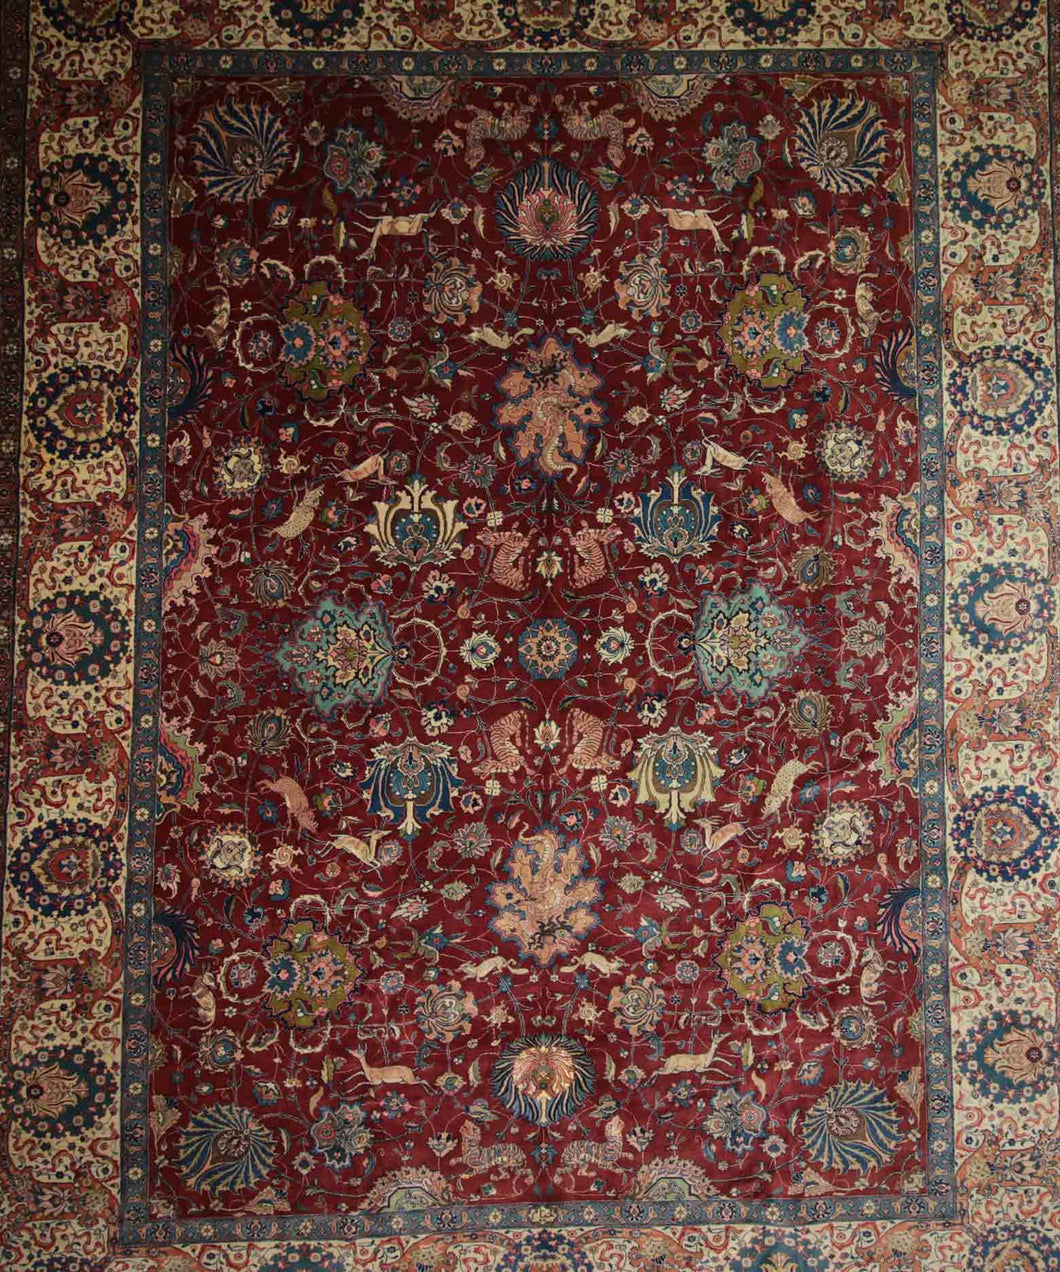 Antique Vegetable Dye Tabriz Persian Area Rug 10x14 One of a Kind